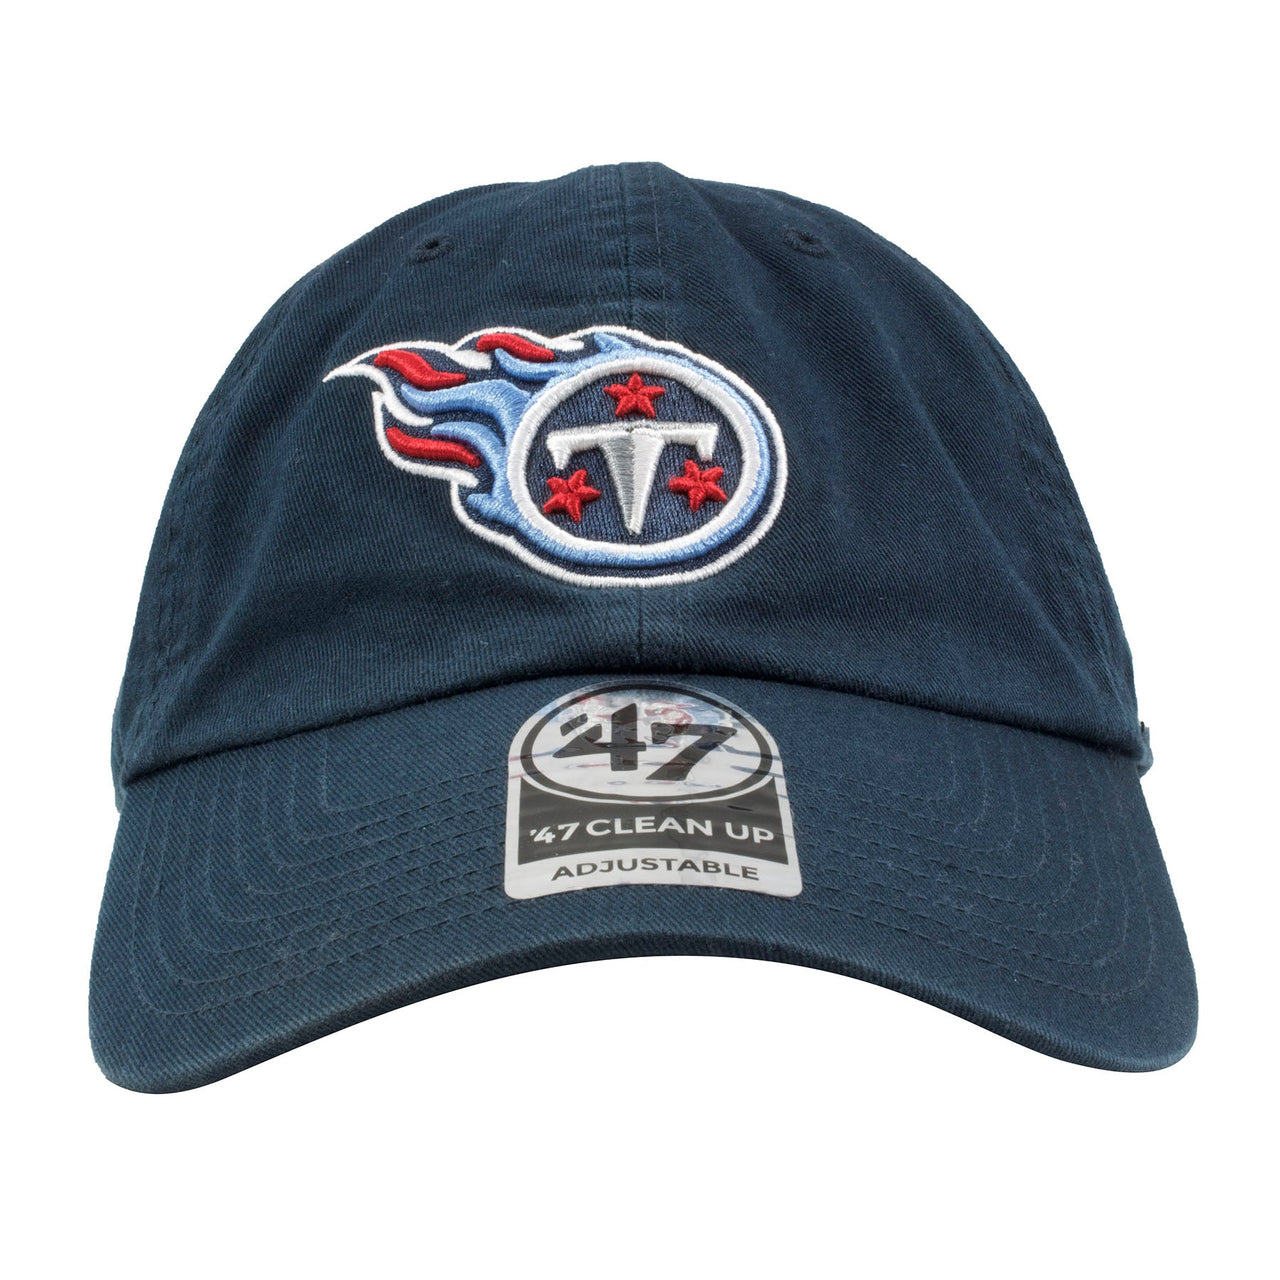 Embroidered on the front of the tennessee titans navy blue dad hat is the tennessee titans logo embroidered in red, blue